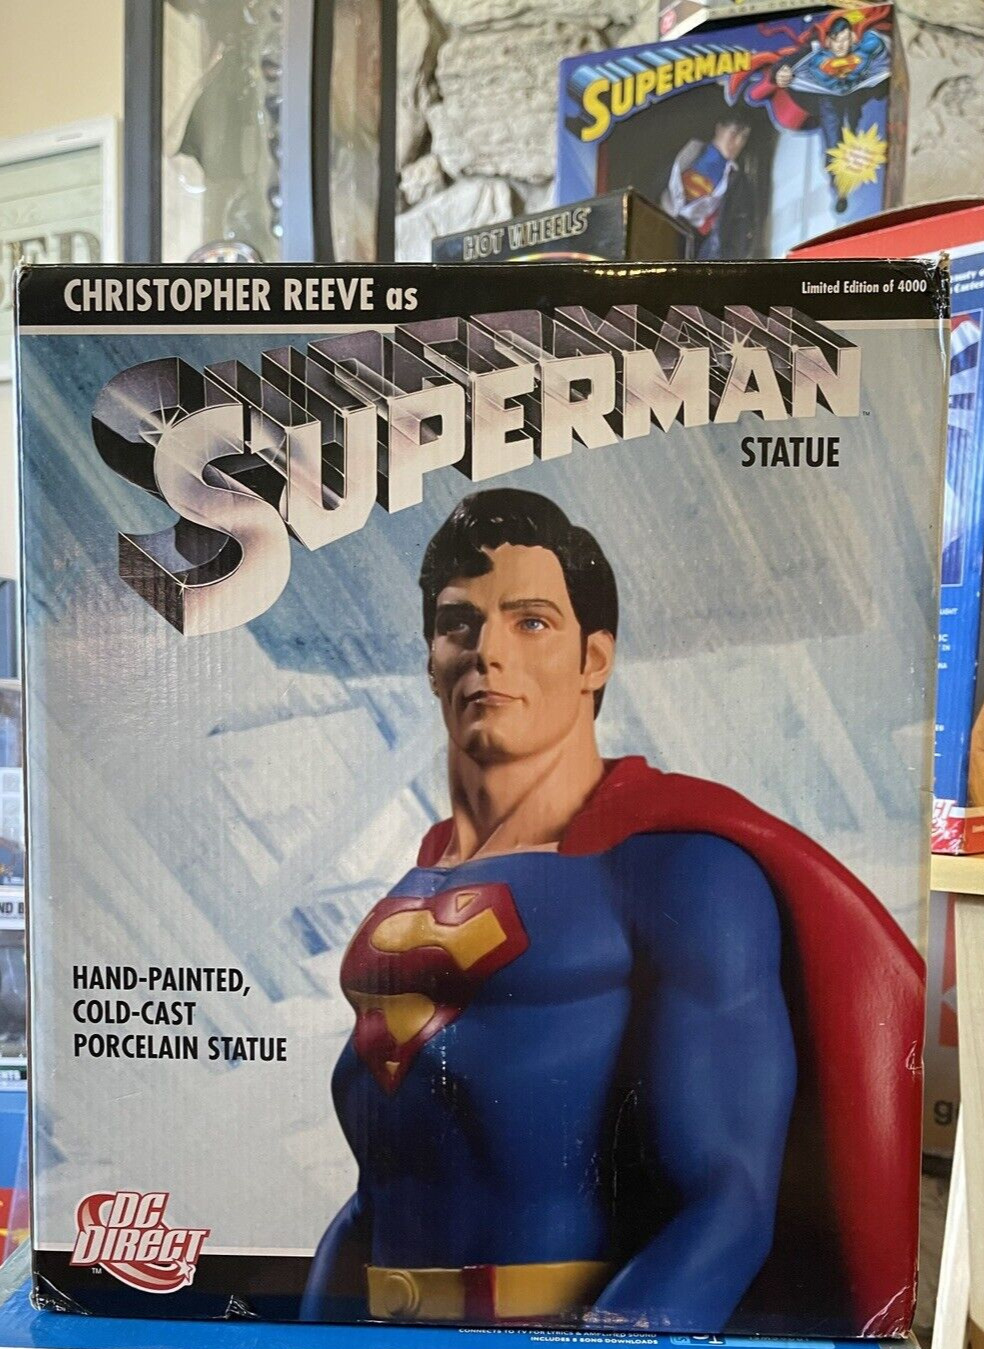 DC Direct Superman Christopher Reeve Sculpted by Karen Palinko Limited Ed.